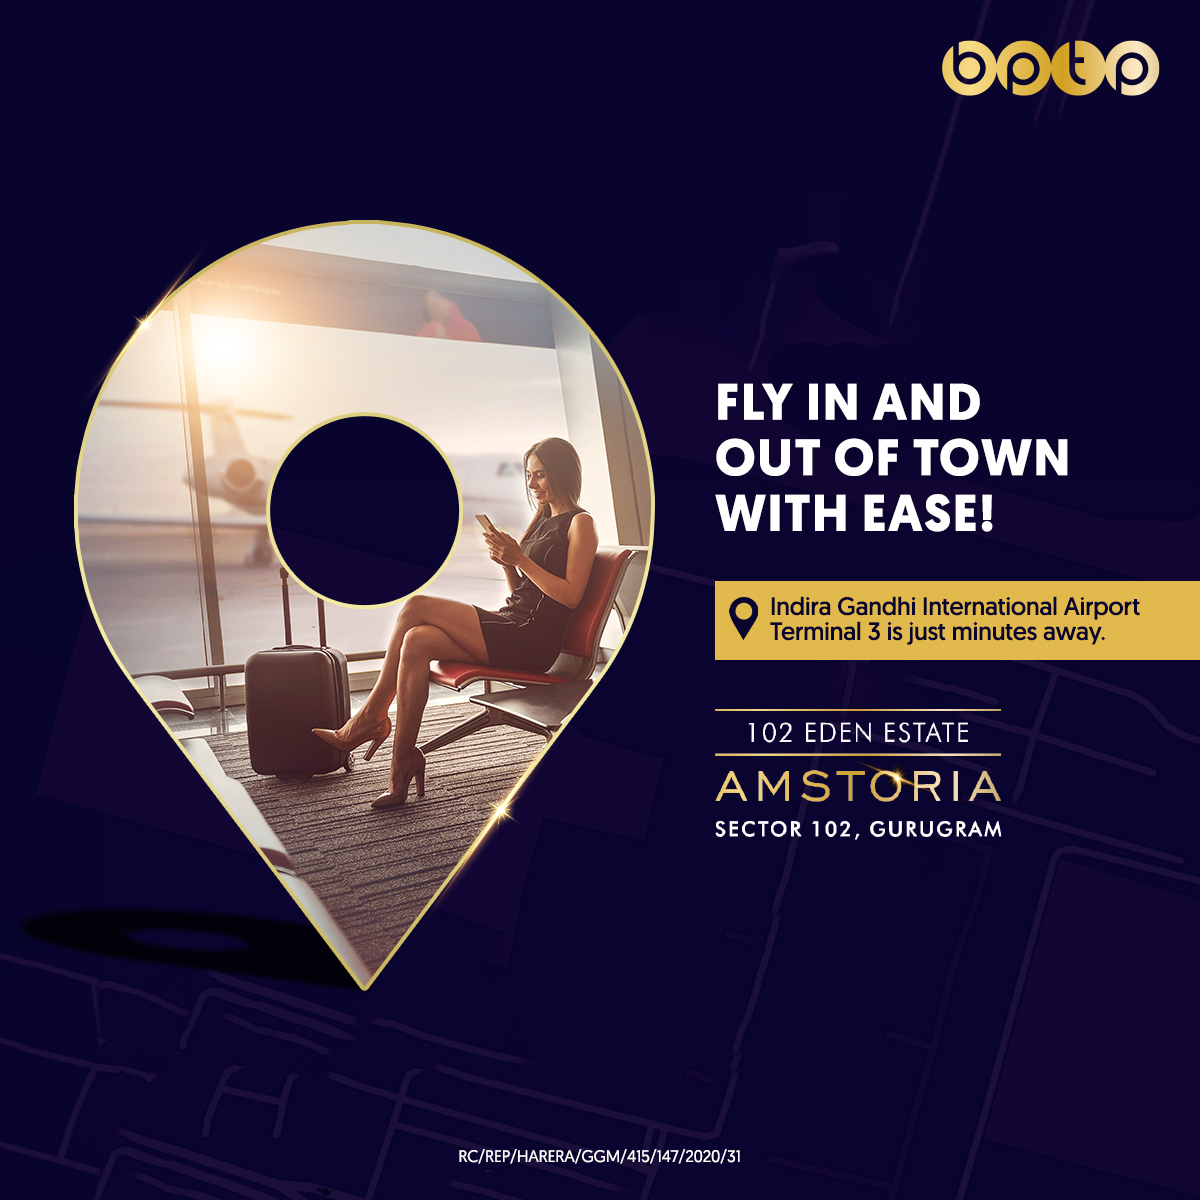 Experience the epitome of convenience and seamless travel at BPTP Amstoria, Gurgaon Update